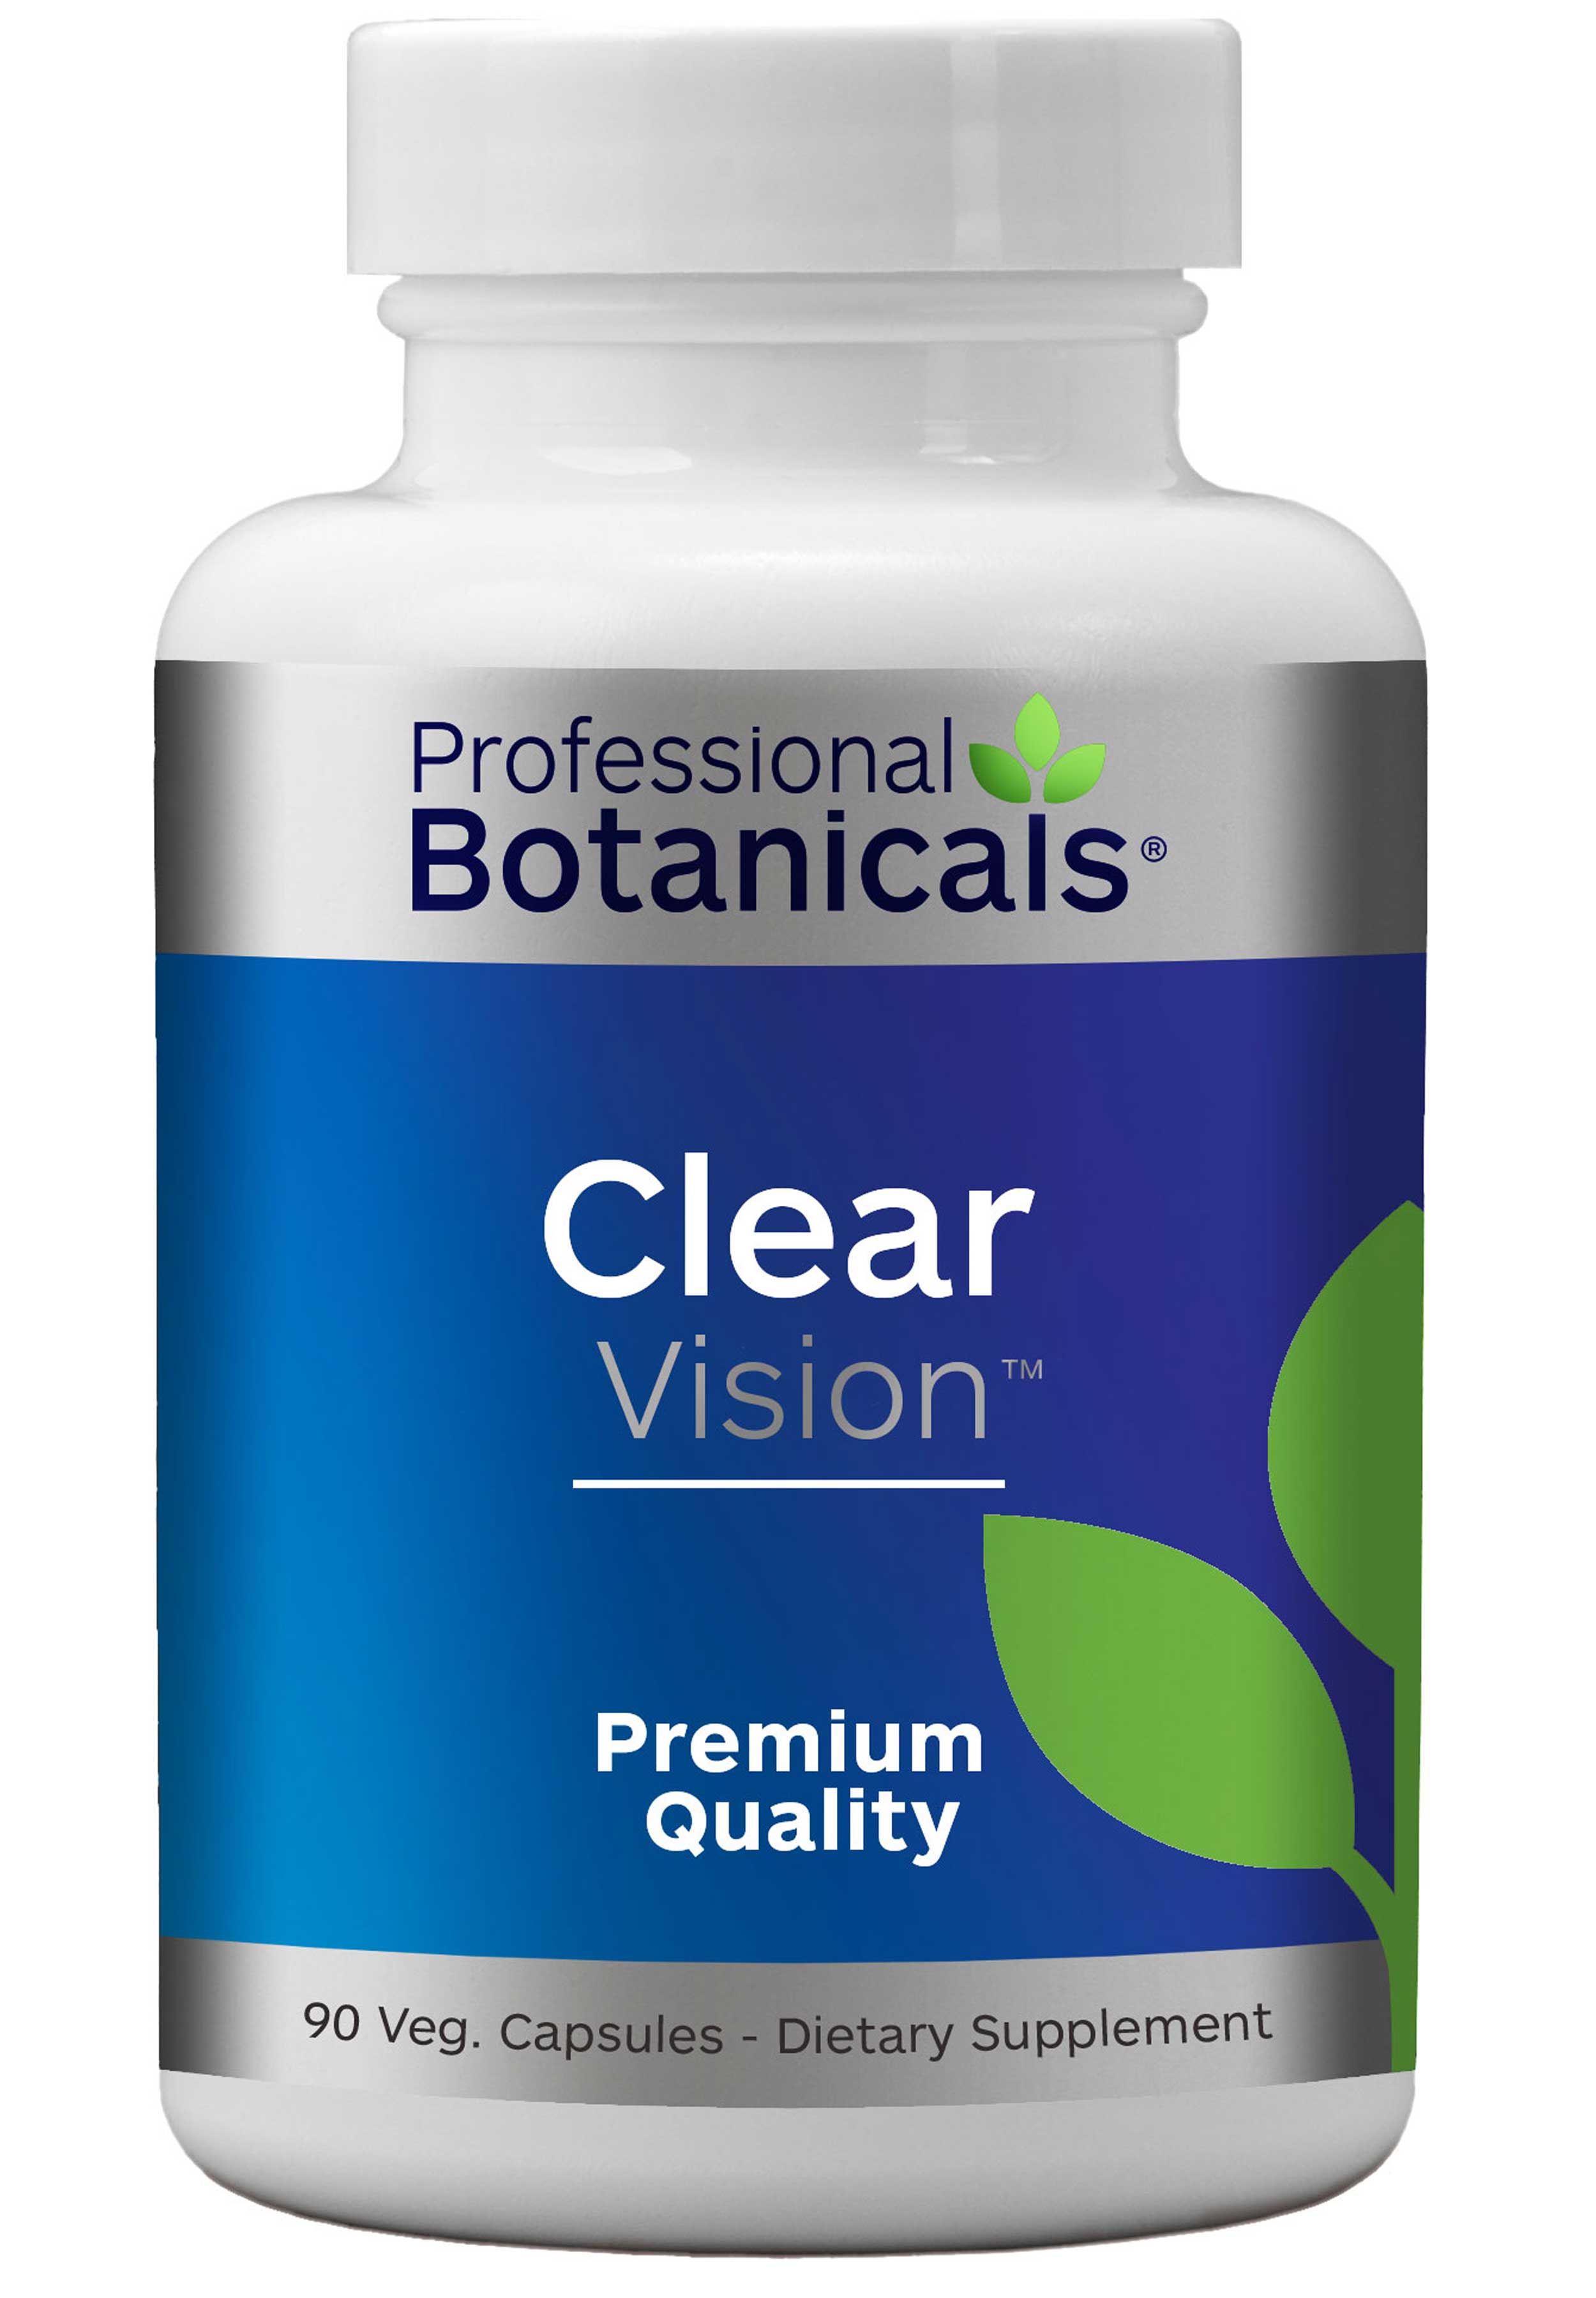 Professional Botanicals Clear Vision